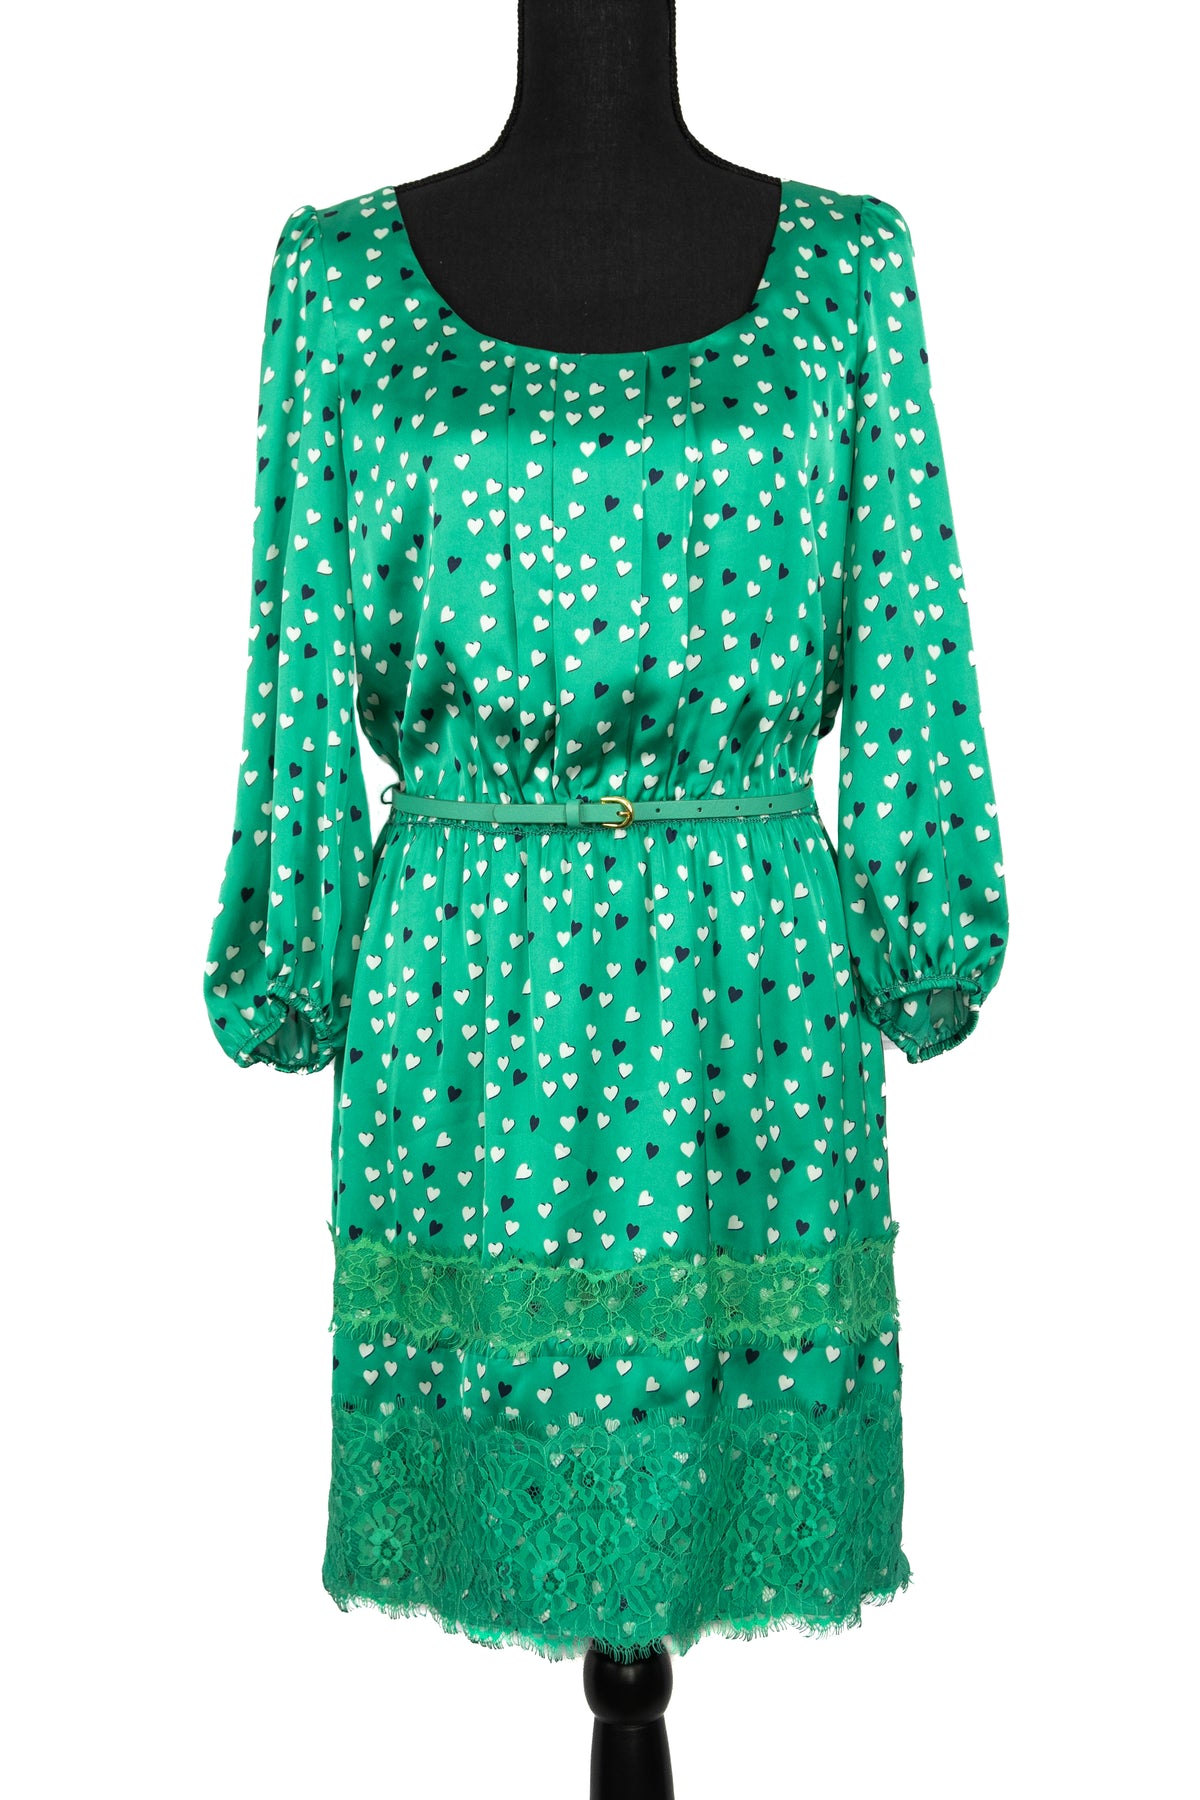 NWT Belted Heart Print Lace Hem Long Sleeve Green Dress - Size Small